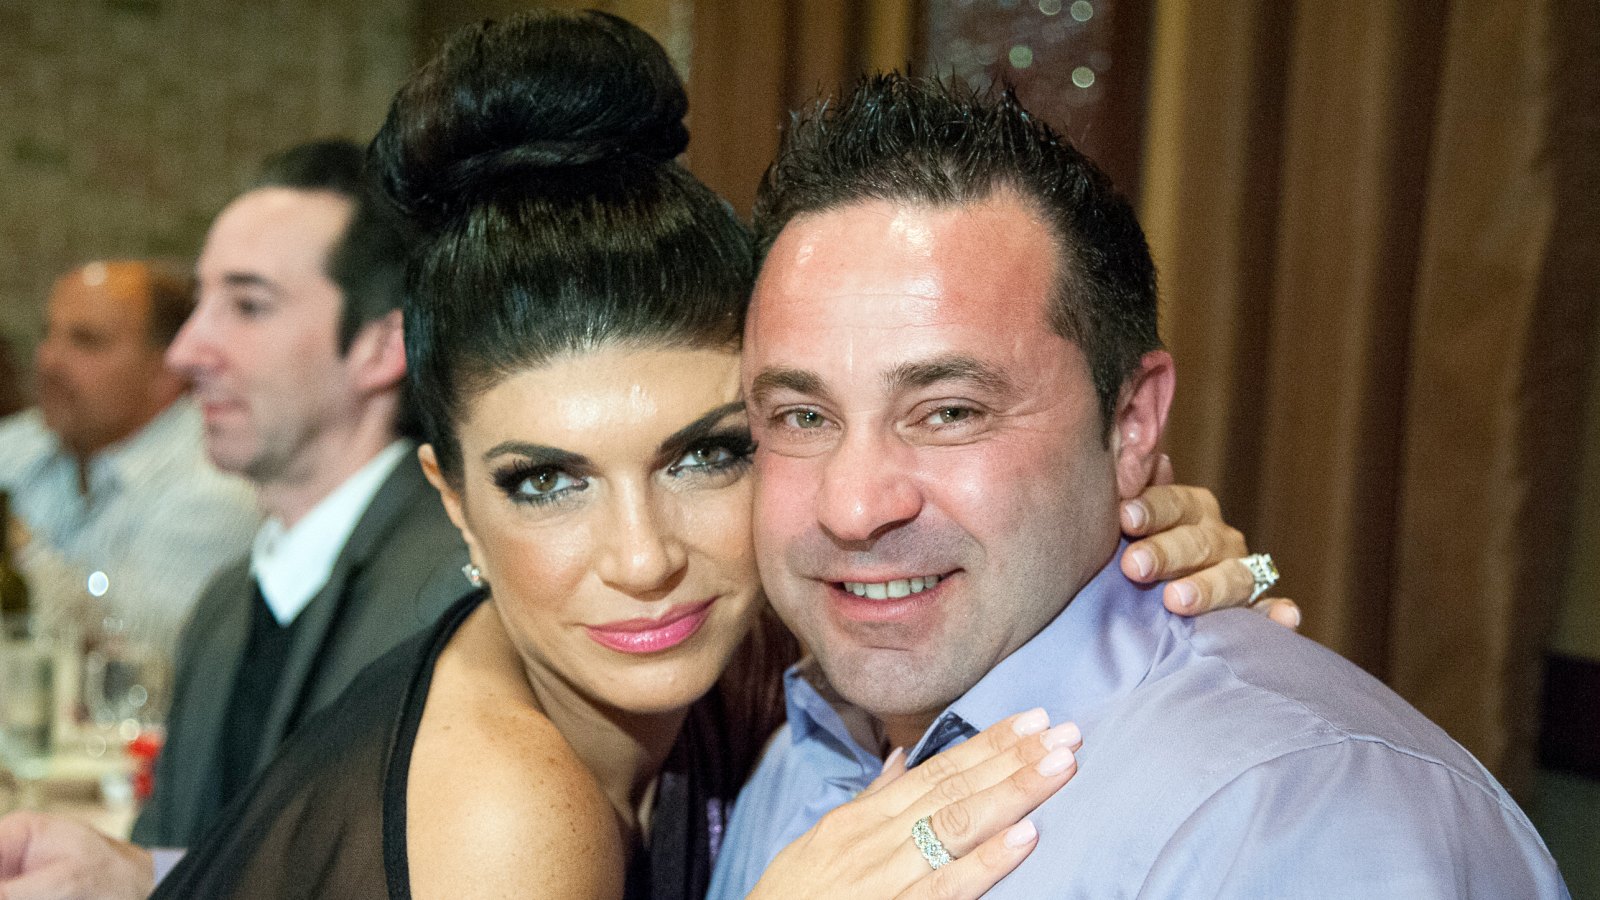 Teresa Giudice Says She's Not 'All About the Holidays' Since Husband Joe Giudice Is in Jail